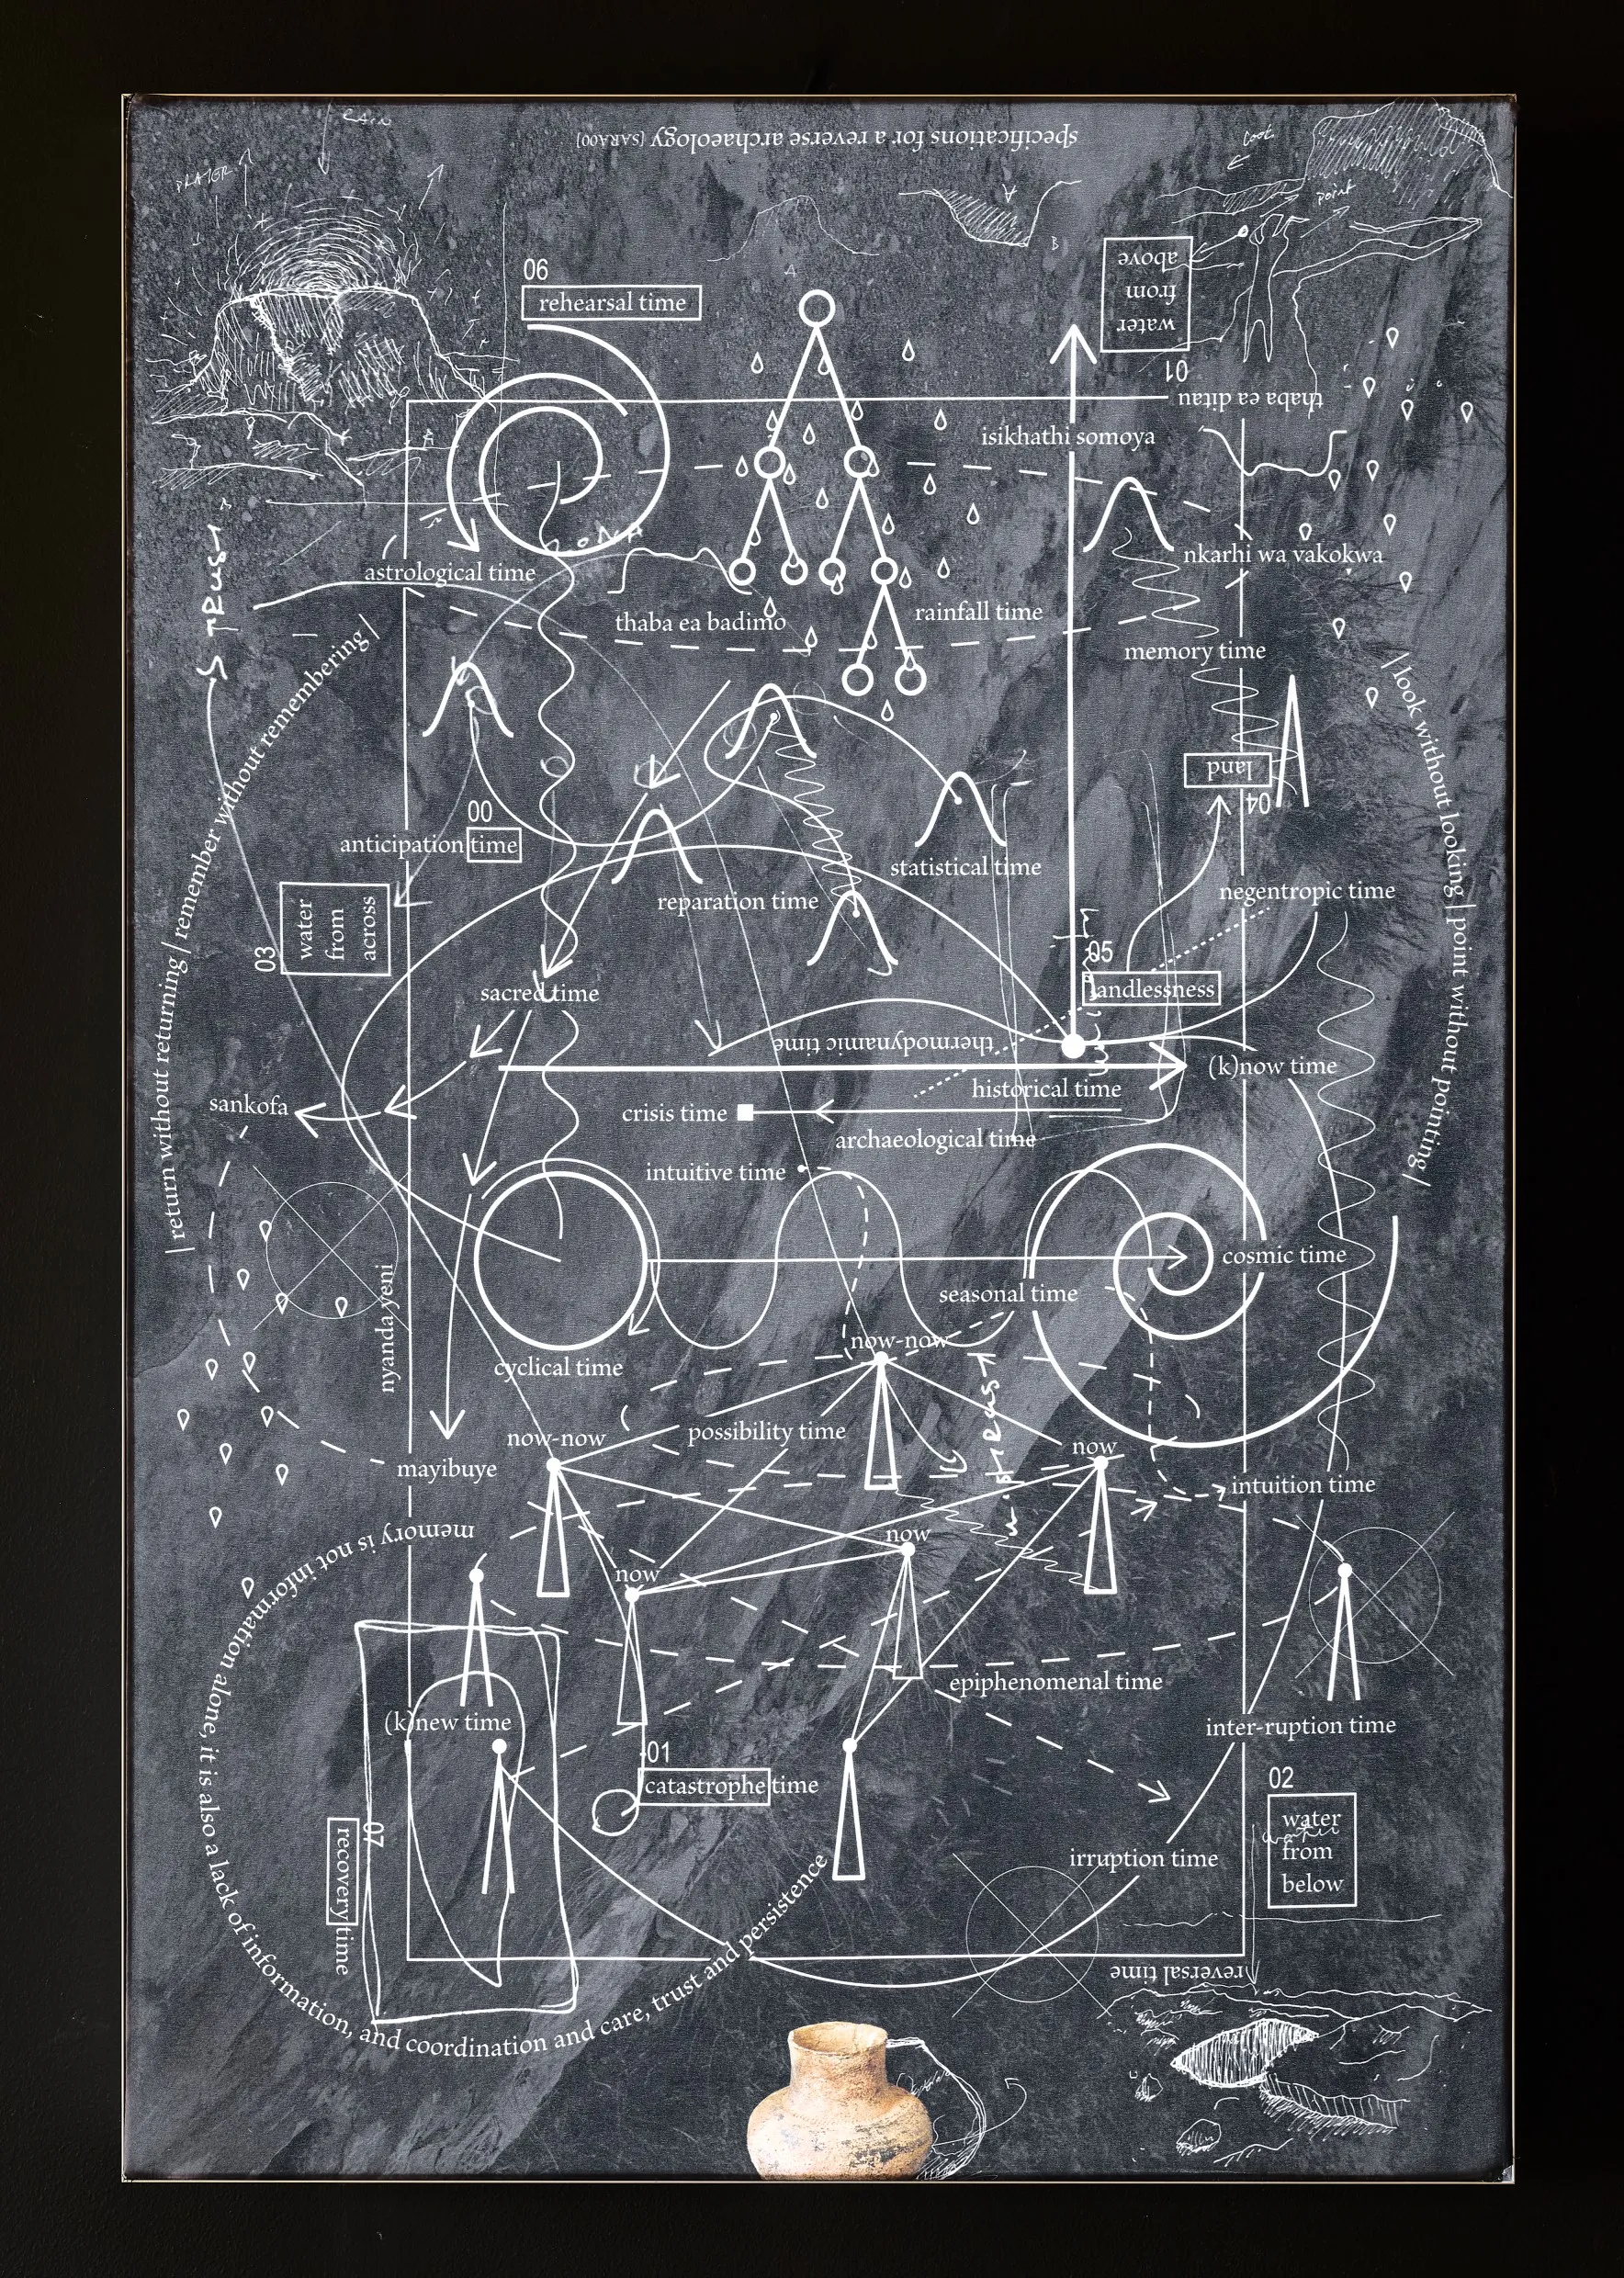 A thinking map drawn with white chalk on a black board